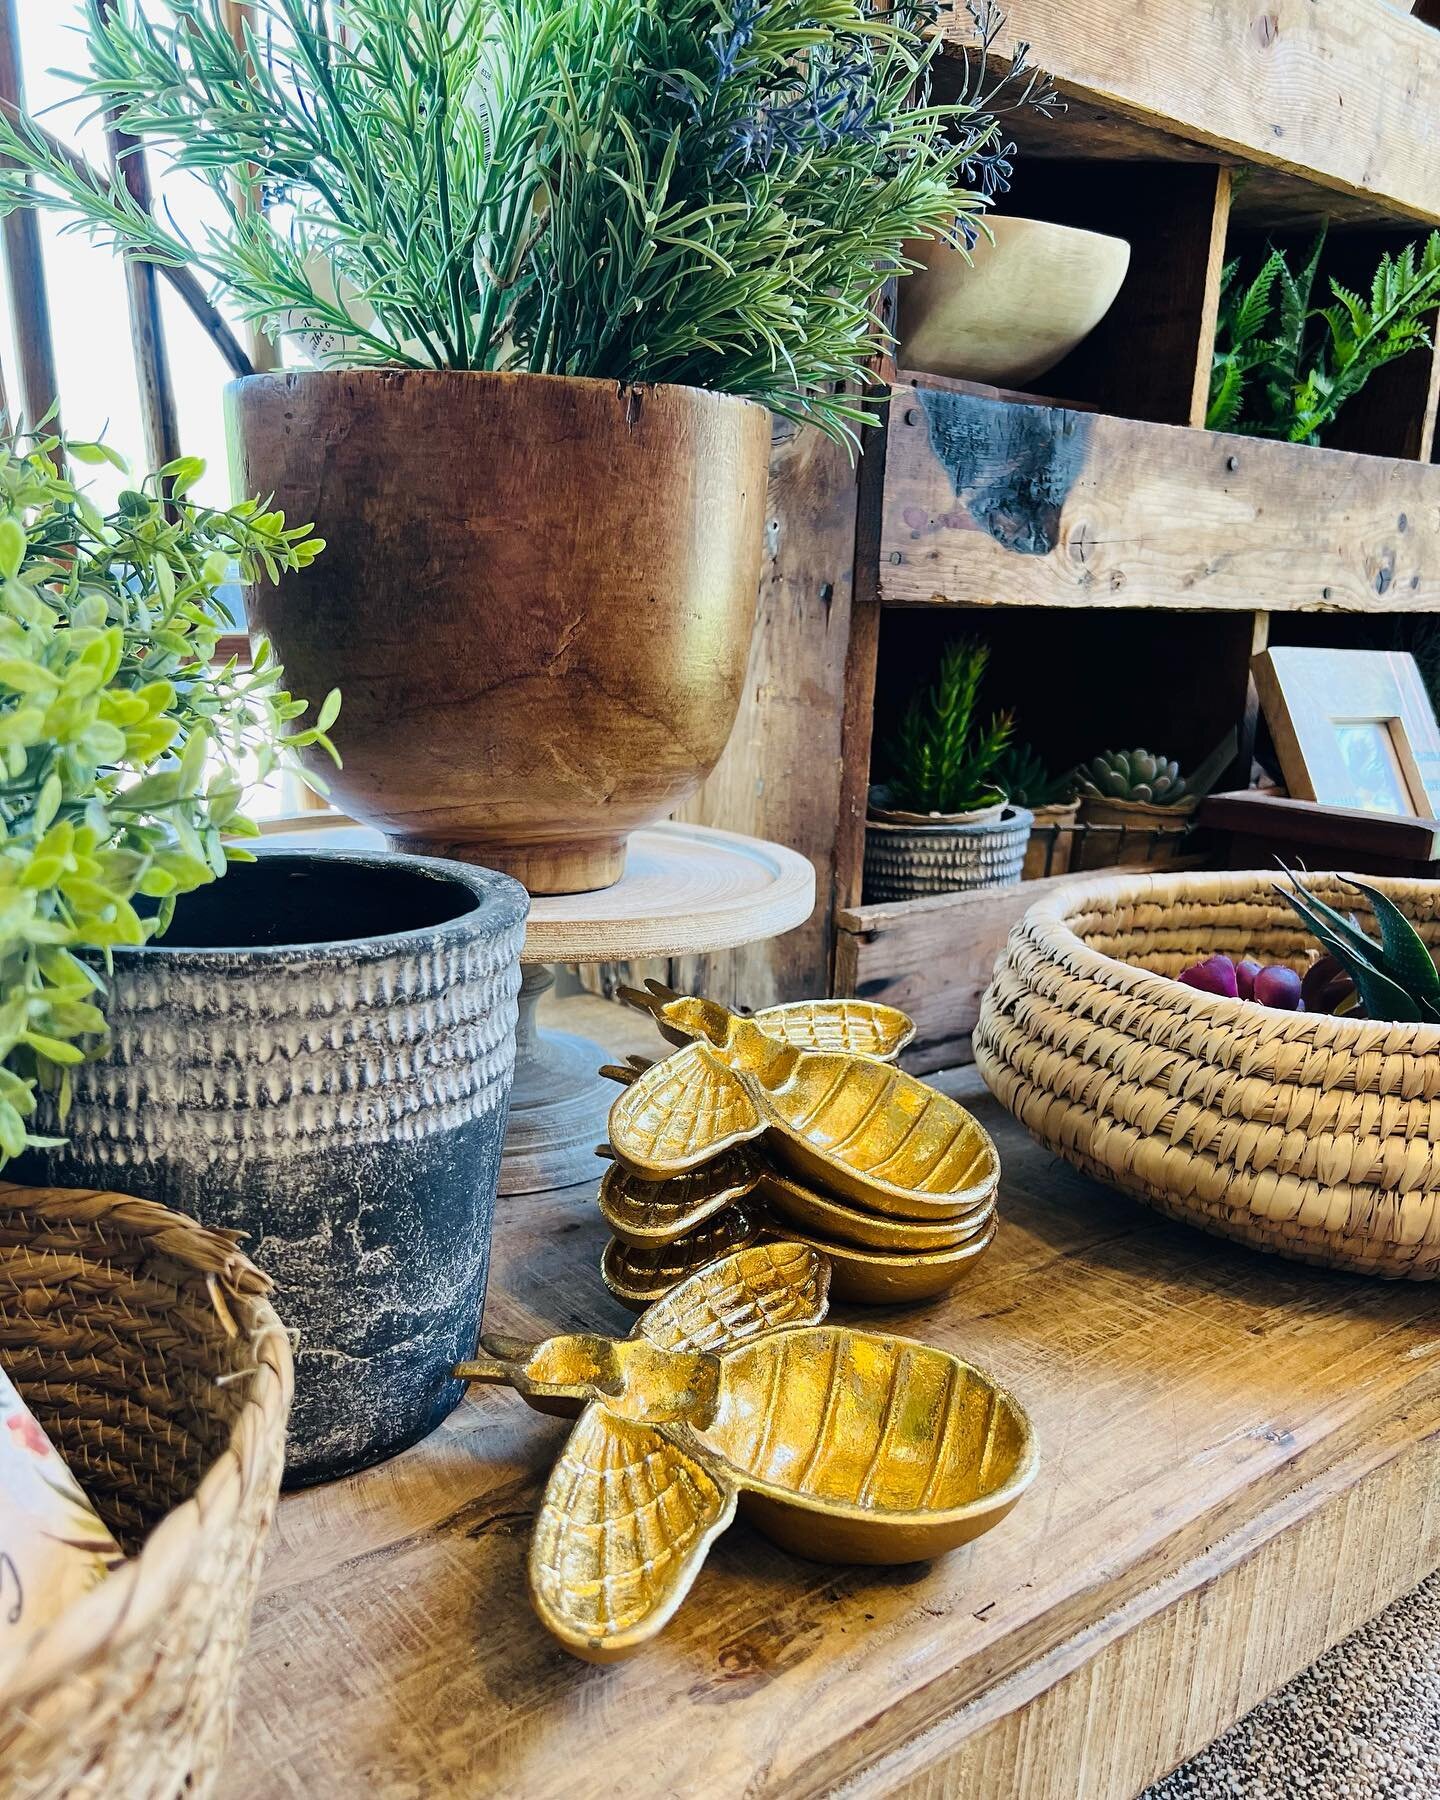 We are OPEN 10-5 &amp; would love to see YOU! ✨
.
.
#farmhouseliving #homelovers #ilovemyhome #farmhousedecorating #farmhousetable #fixerupperstyle #sweetandsouthernfinds #aliltownalottalove #shopsmallbusiness #taylortx #homedesign #farmhouselove #ho